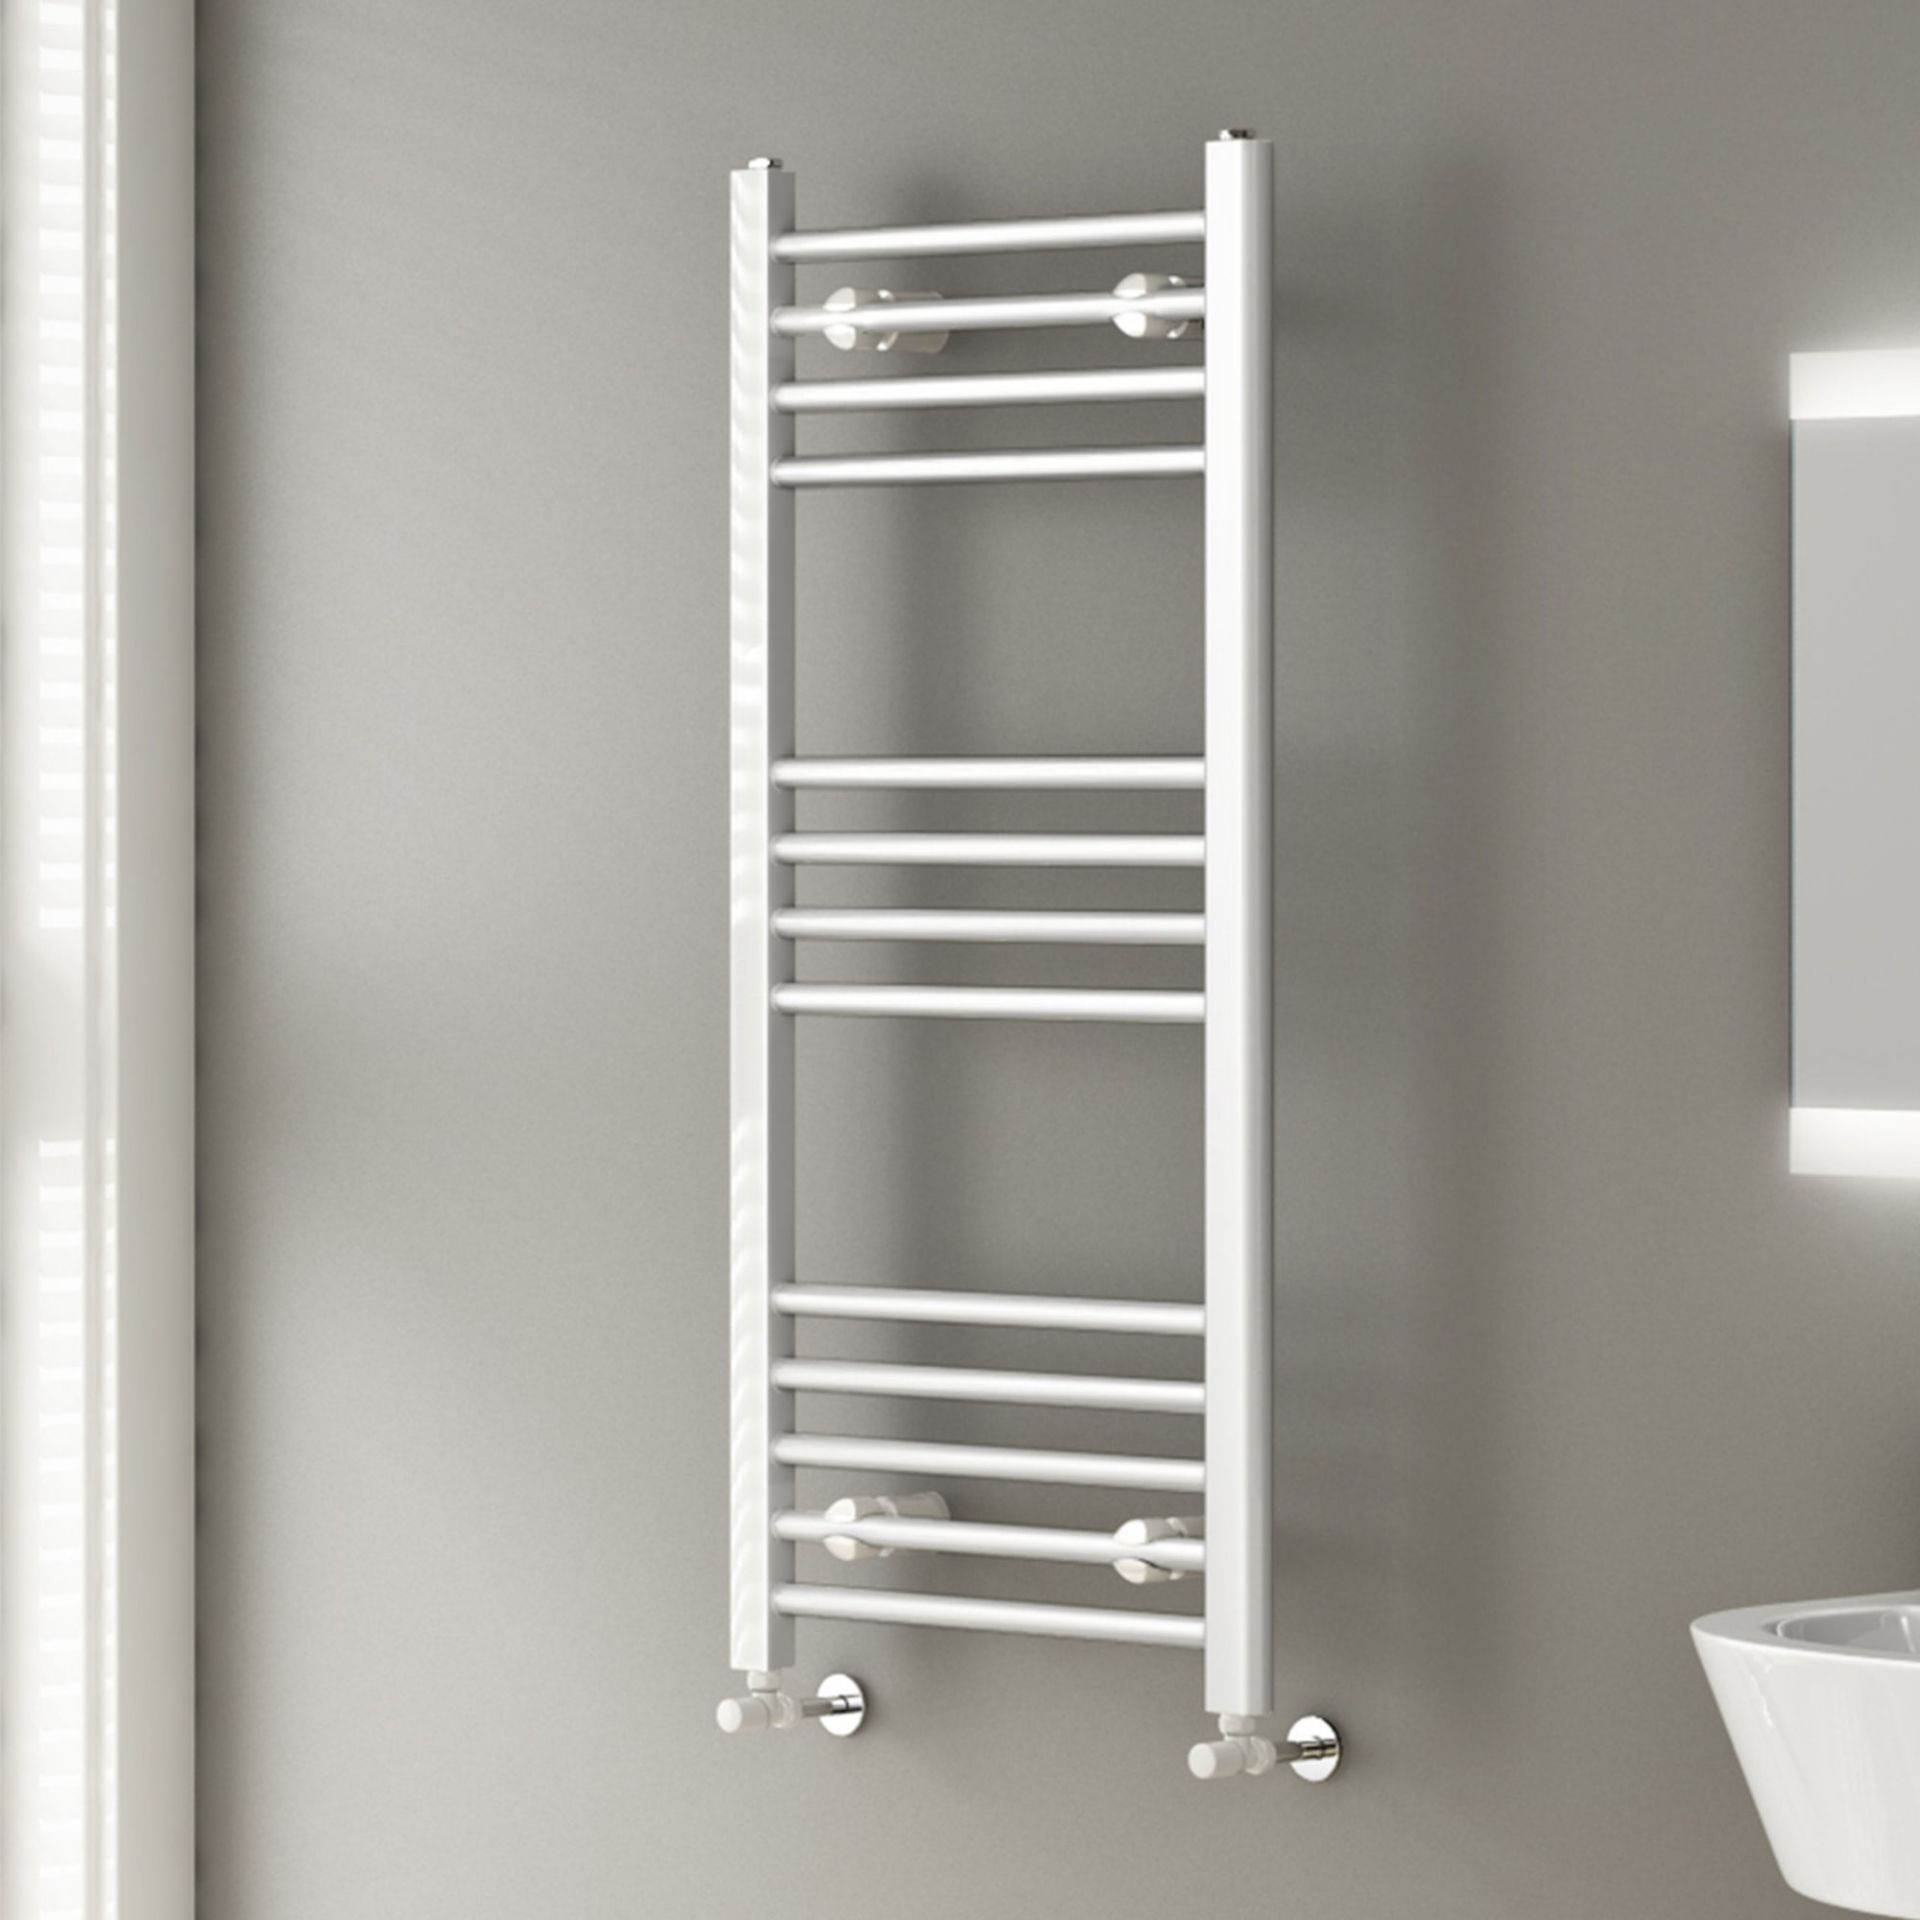 (PT166) 1000x450mm White Straight Rail Ladder Towel Radiator. Made from low carbon steel Finished